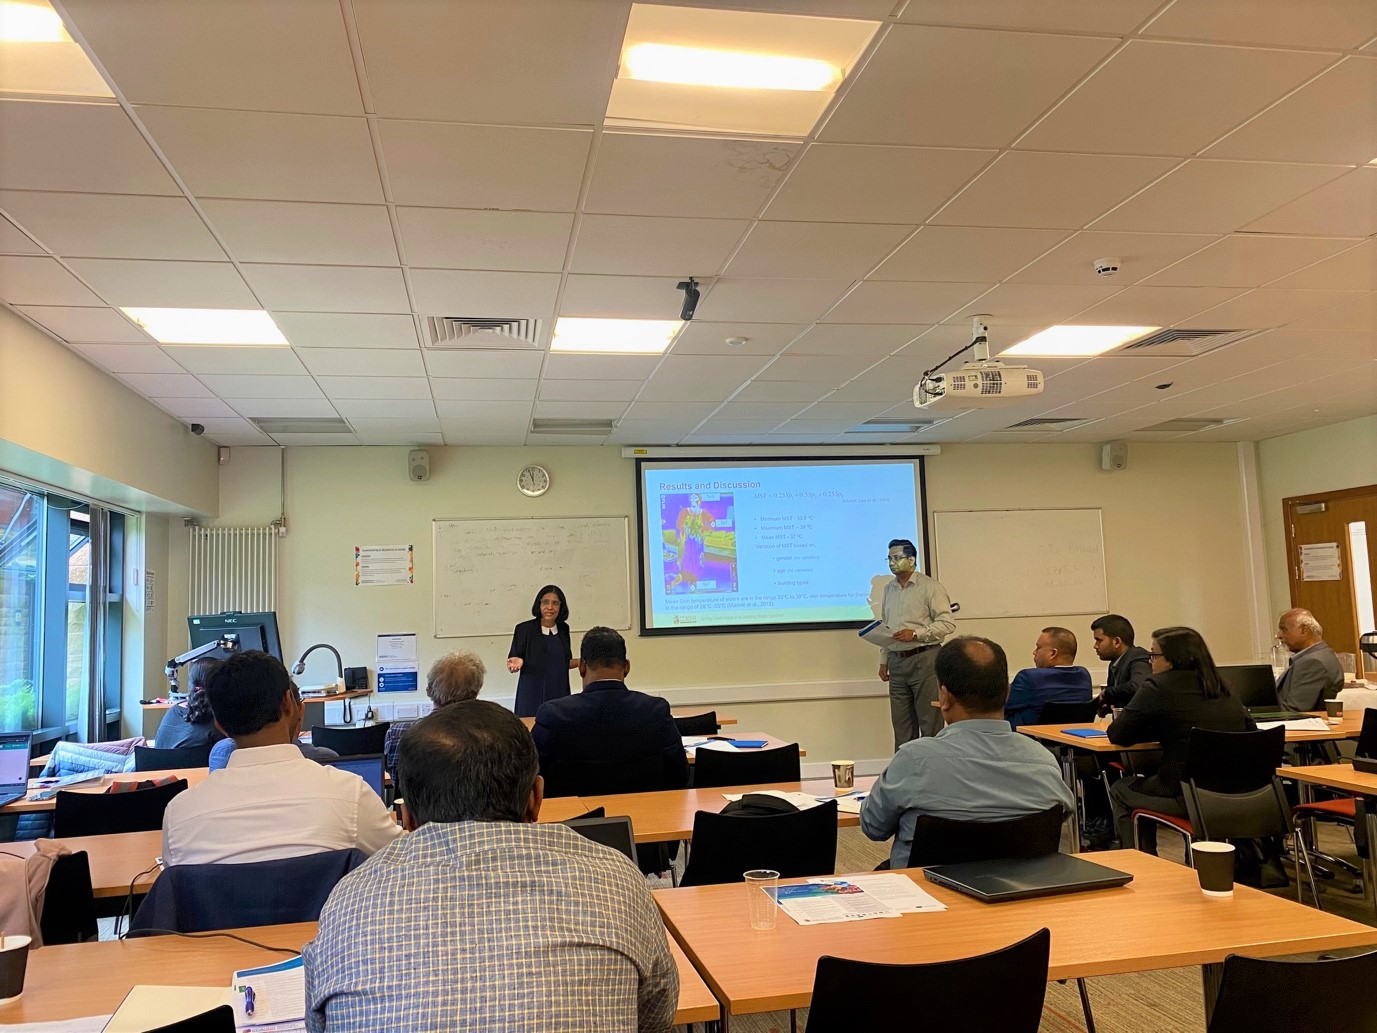 International research training event on ‘Tackling climate change as an underlying disaster risk driver’ at the University of Huddersfield-UK, funded by ERASMUS+